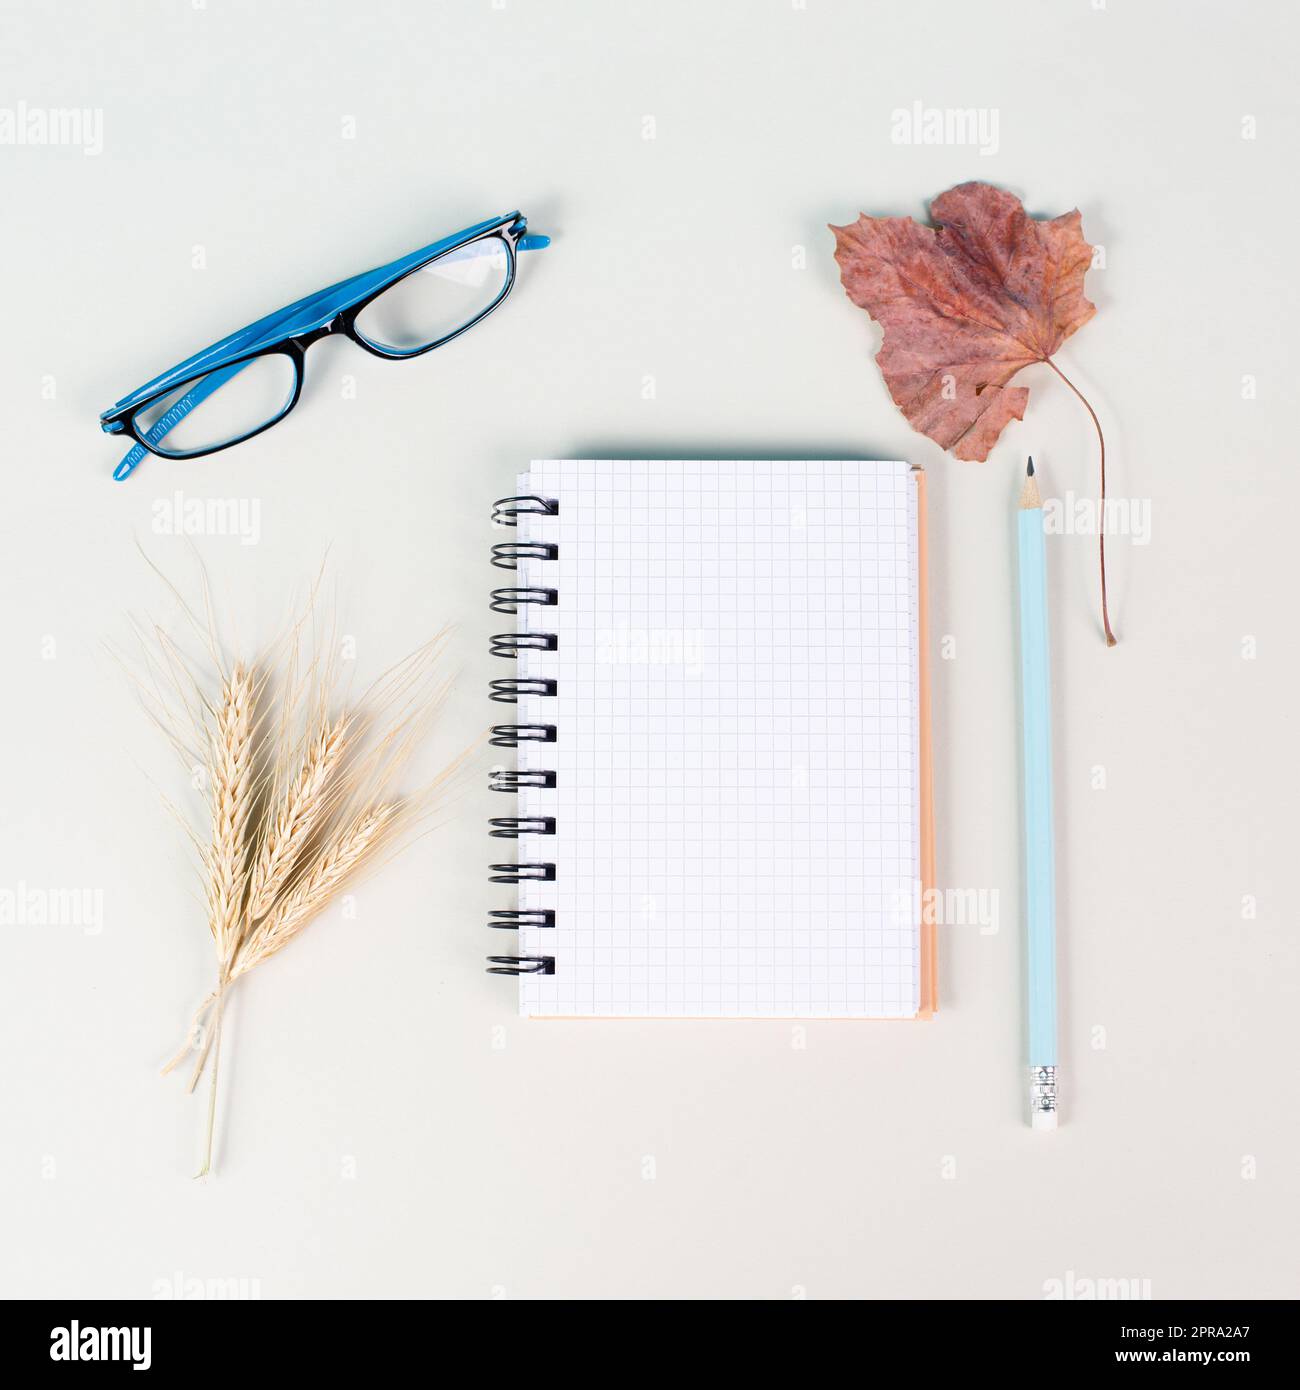 Empty notebook with eyeglasses, a pen and wheat autumn template with colorful leaves, office desk Stock Photo